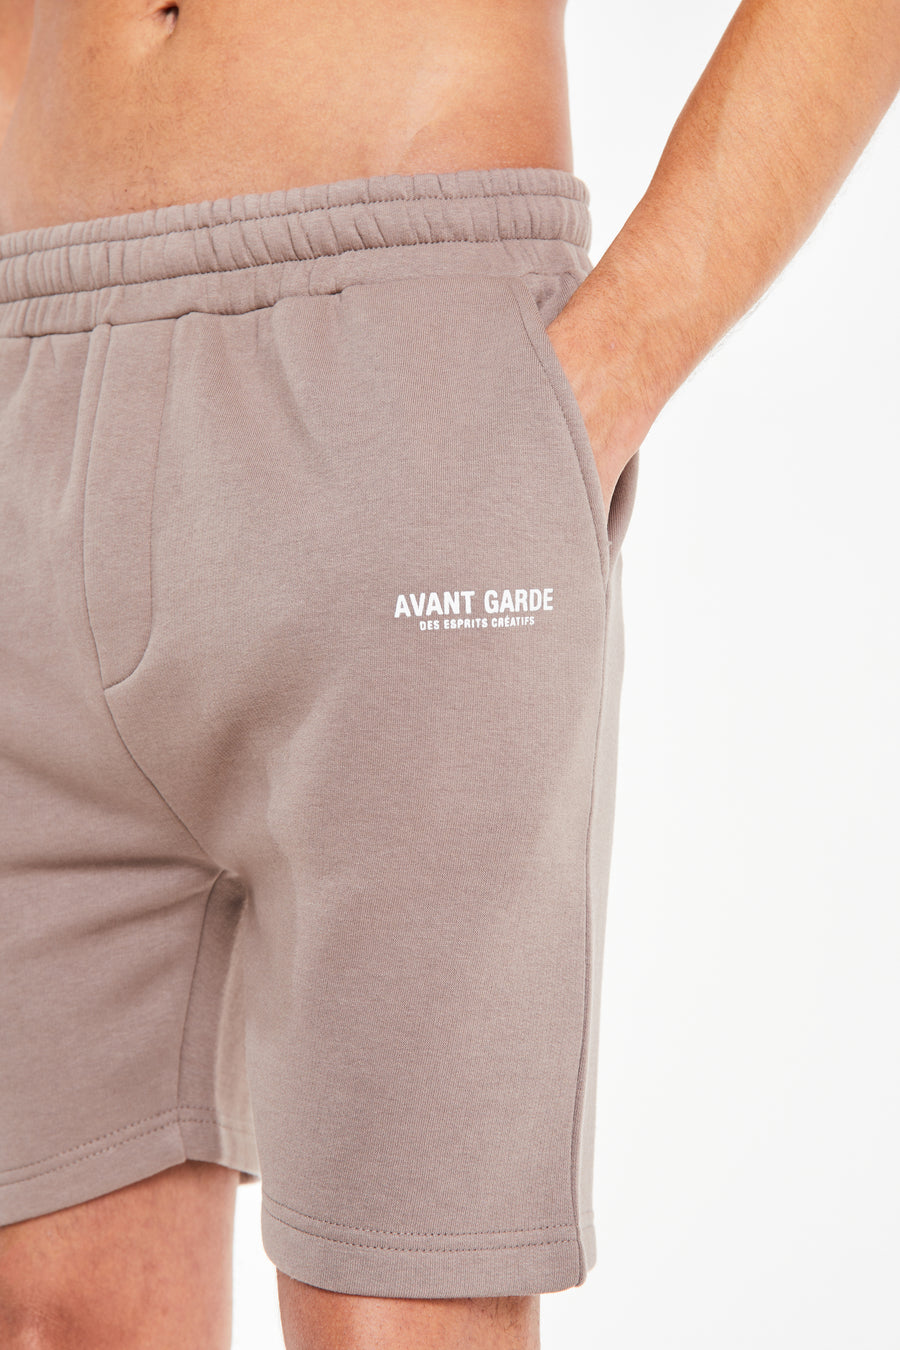 close up of 'avant garde paris' logo on mix jersey shorts in sale